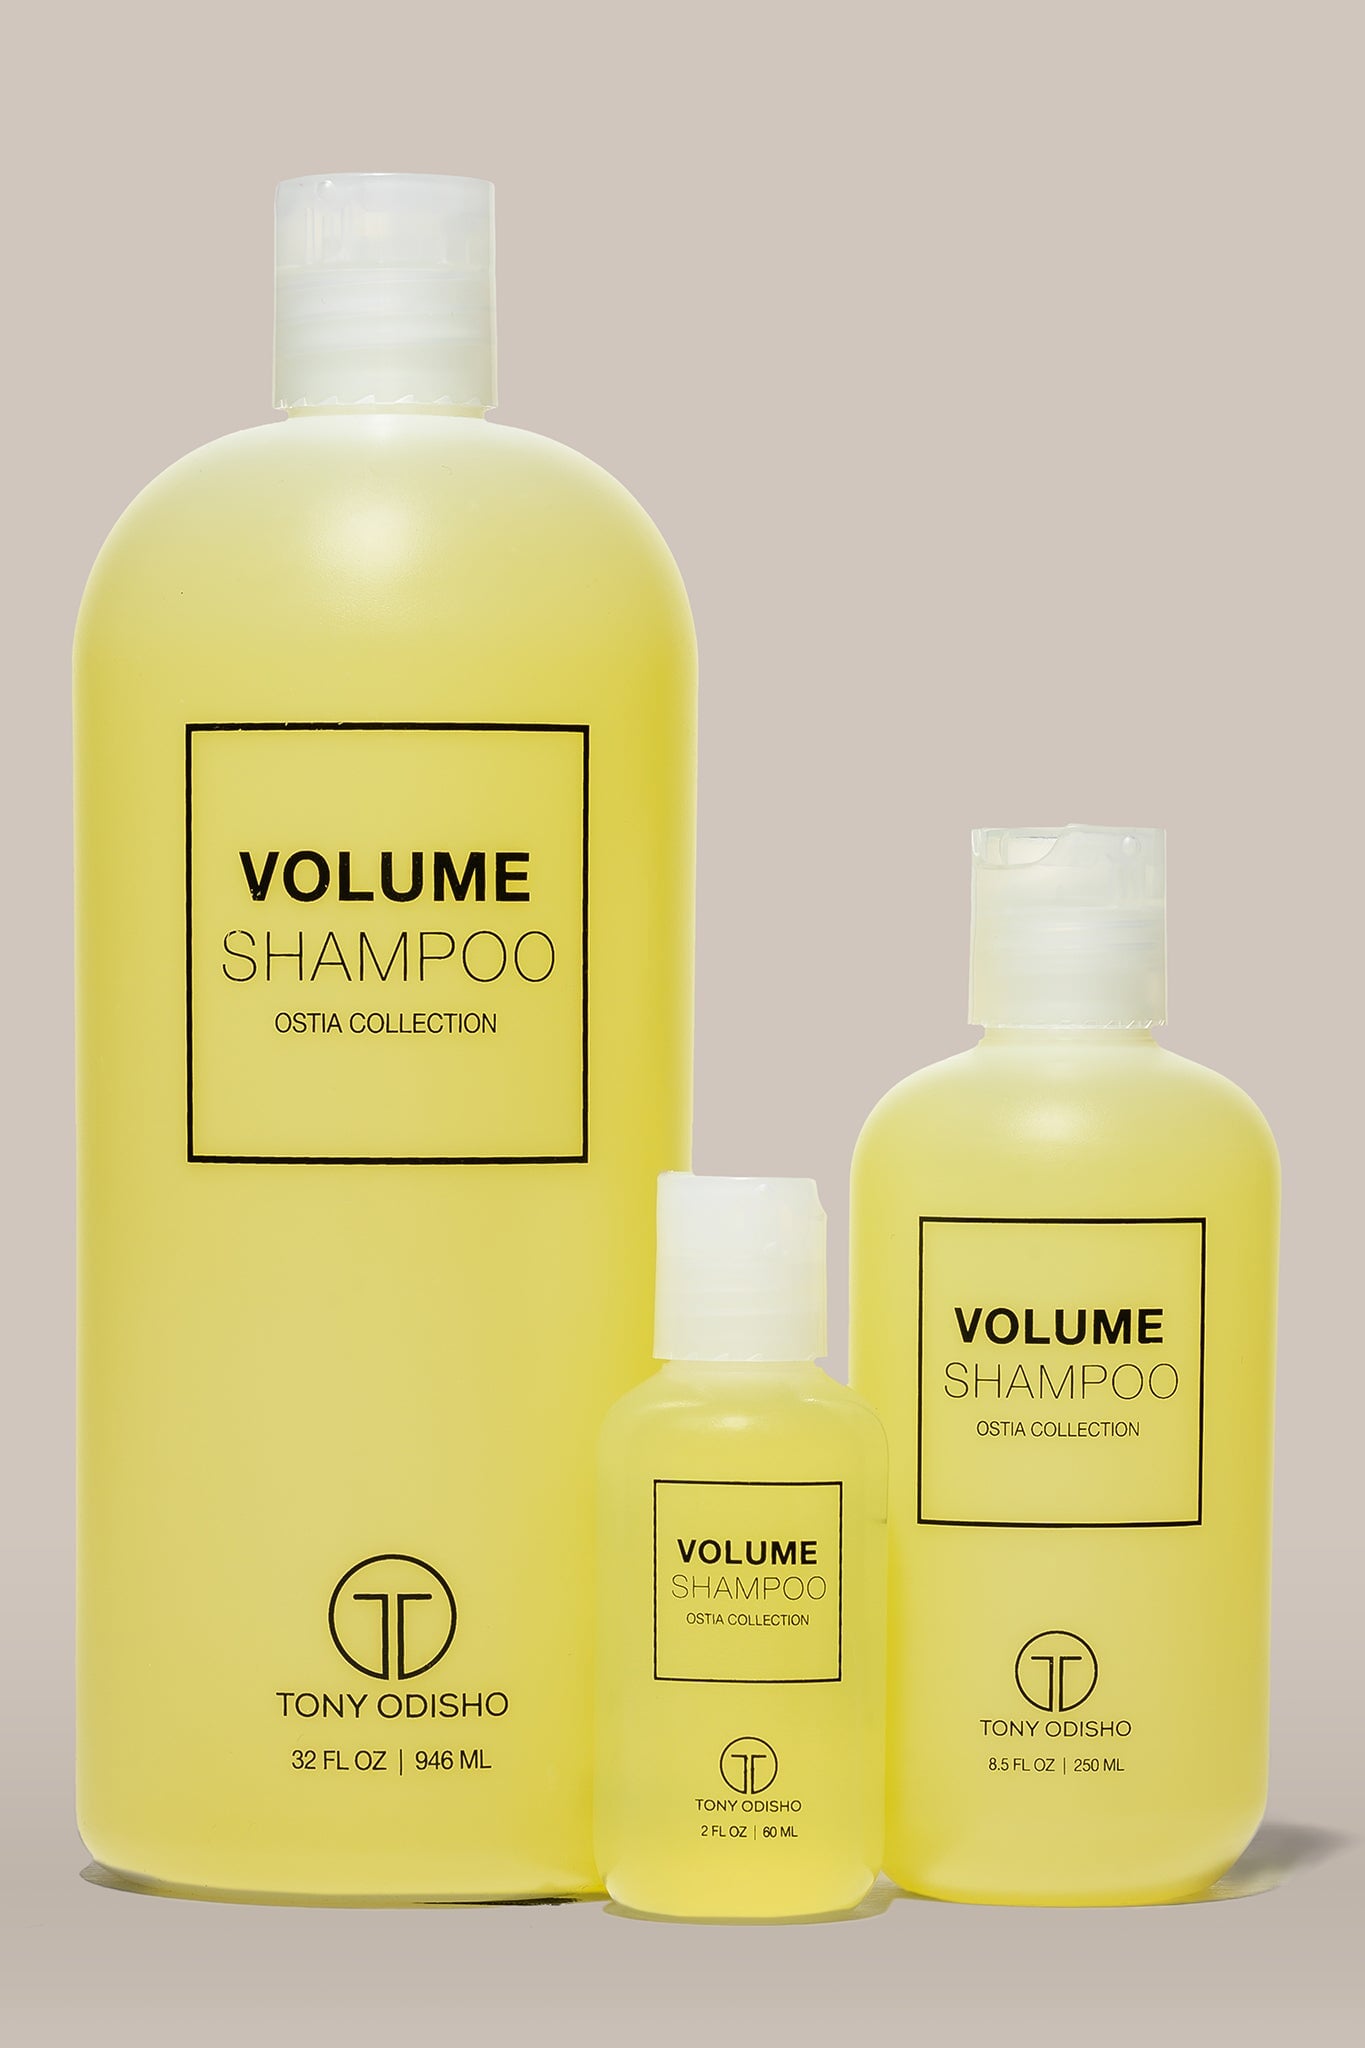 Ostia Collection Volume Shampoo | Gentle on hair and hair color | Infused with proteins to soften the hair | Cleanses and Stimulates the hair